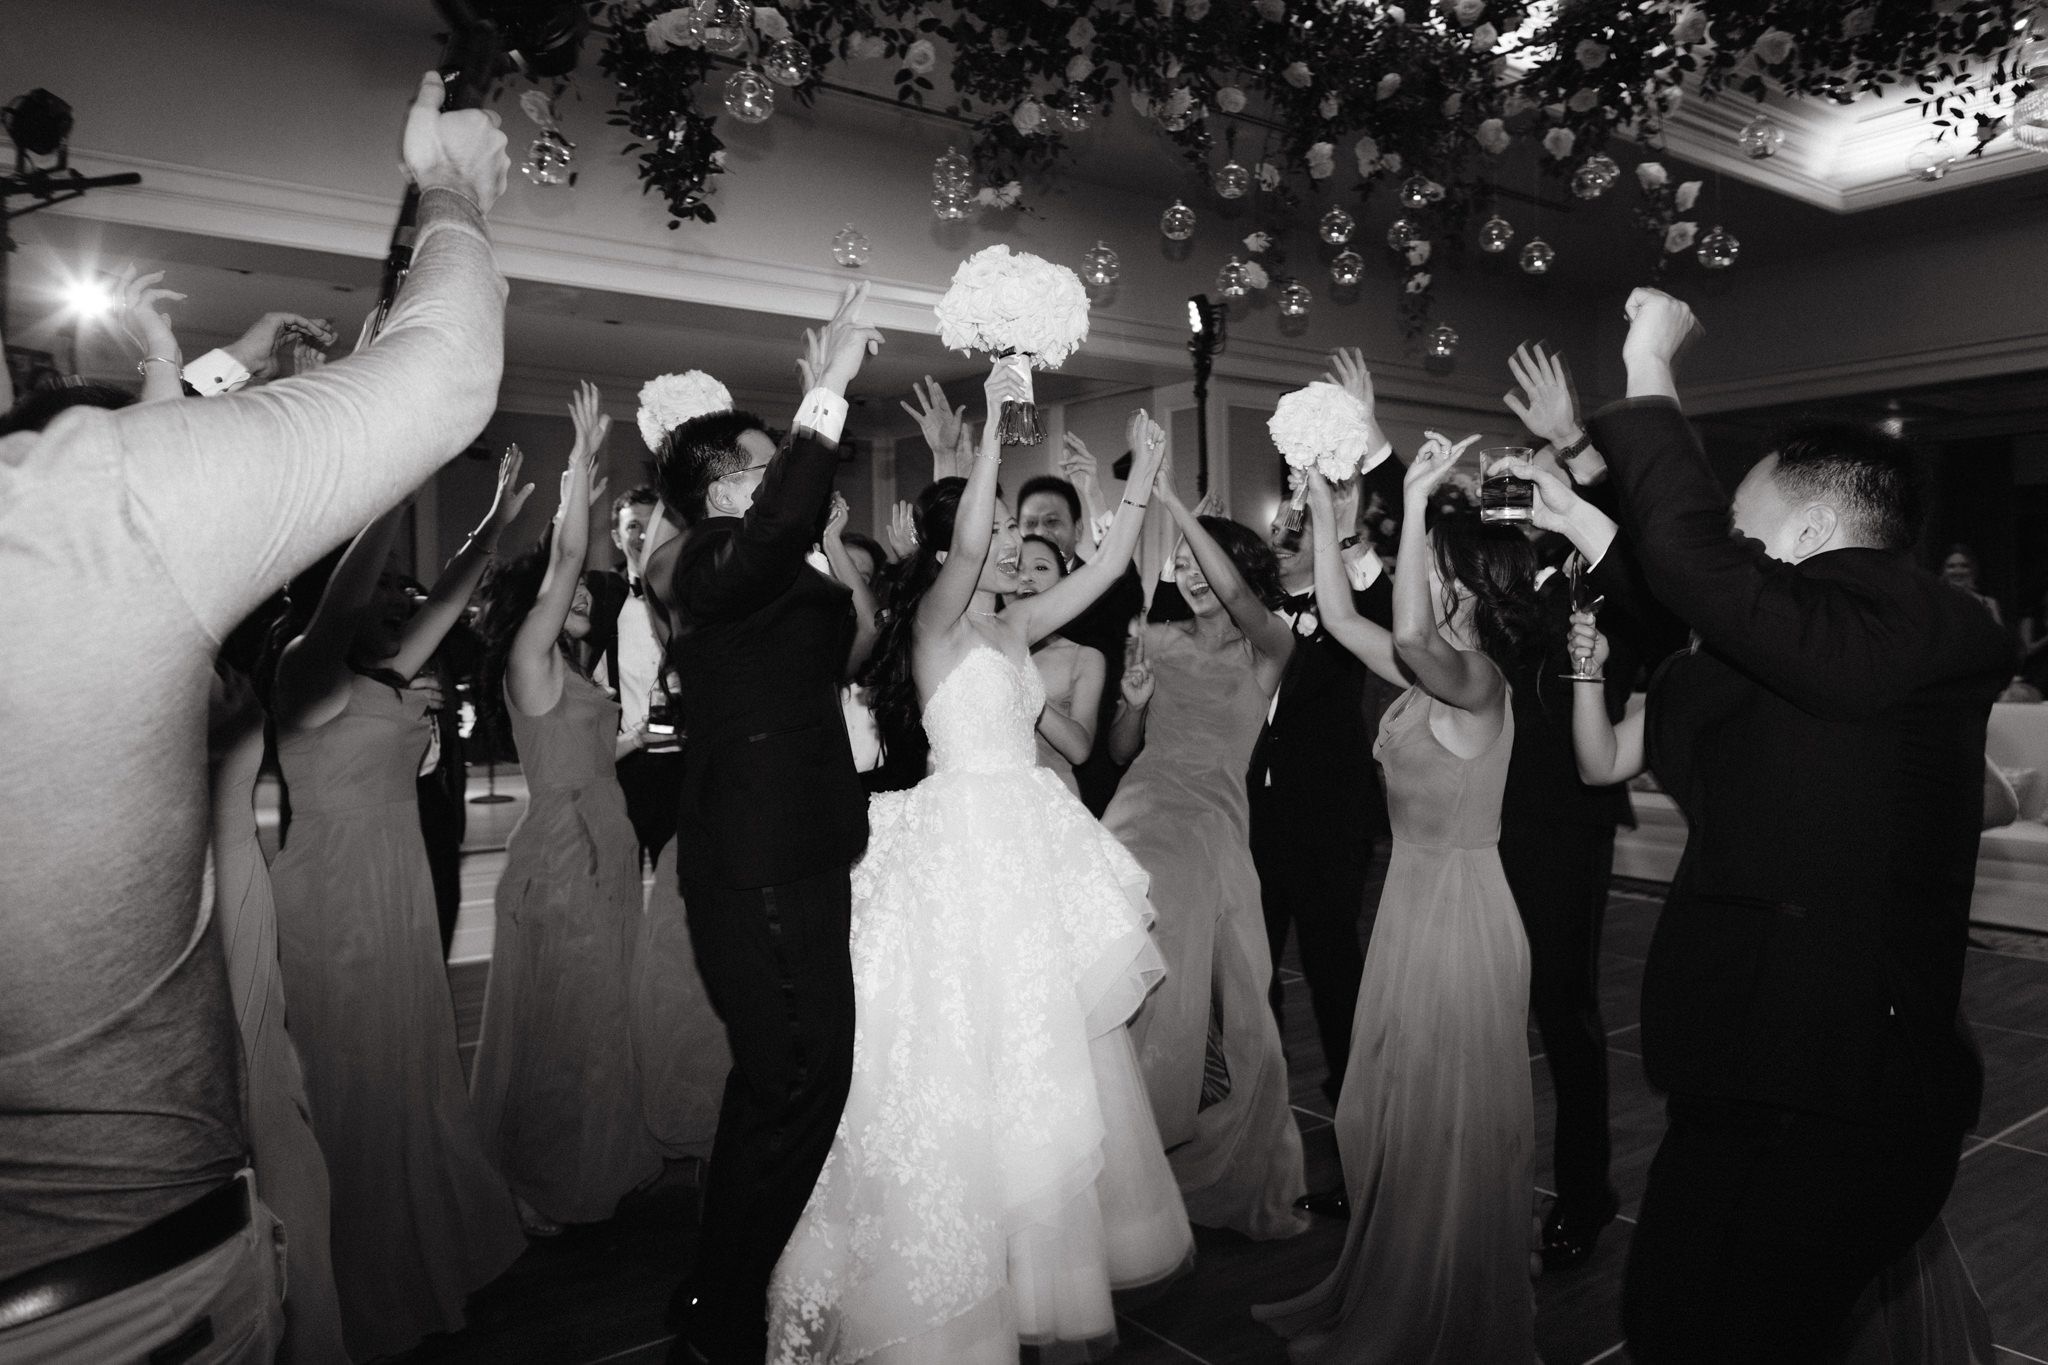 The bride, groom and guests are happily dancing the night away. Image by Jenny Fu Studio